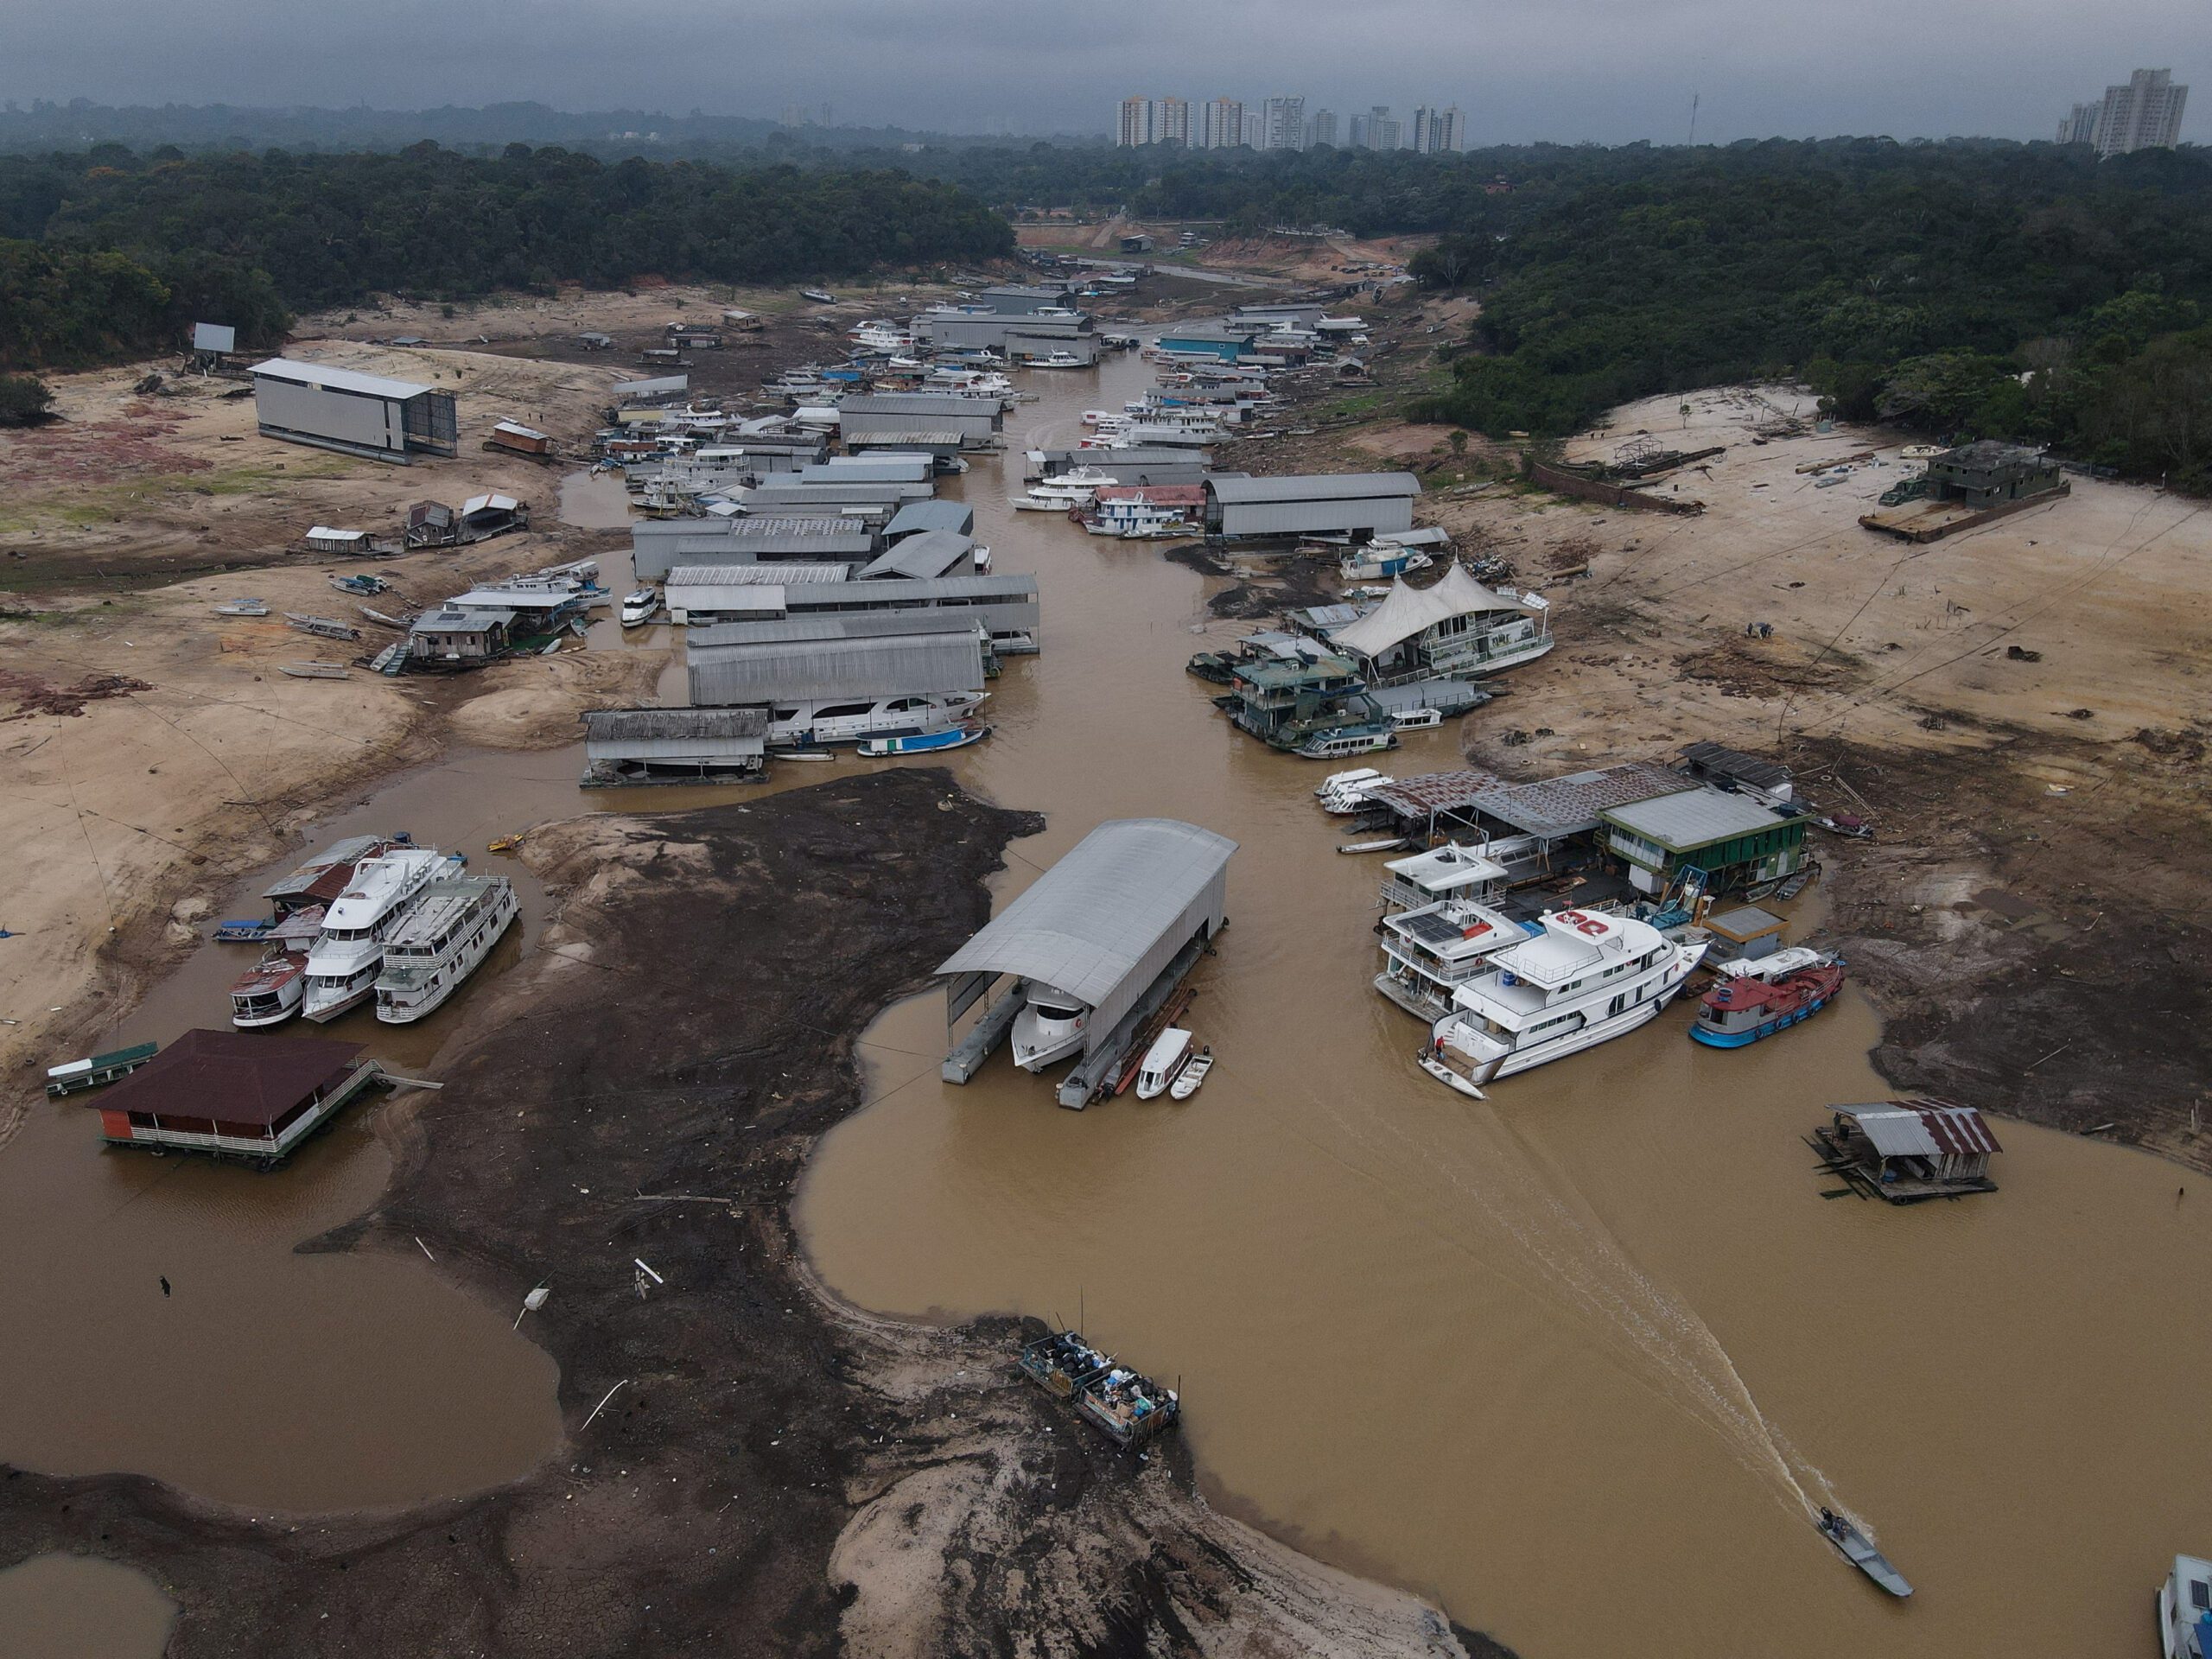 Brazil drought reduces Amazon river port water levels to 121-year record low. REUTERS/Bruno Kelly/File Photo